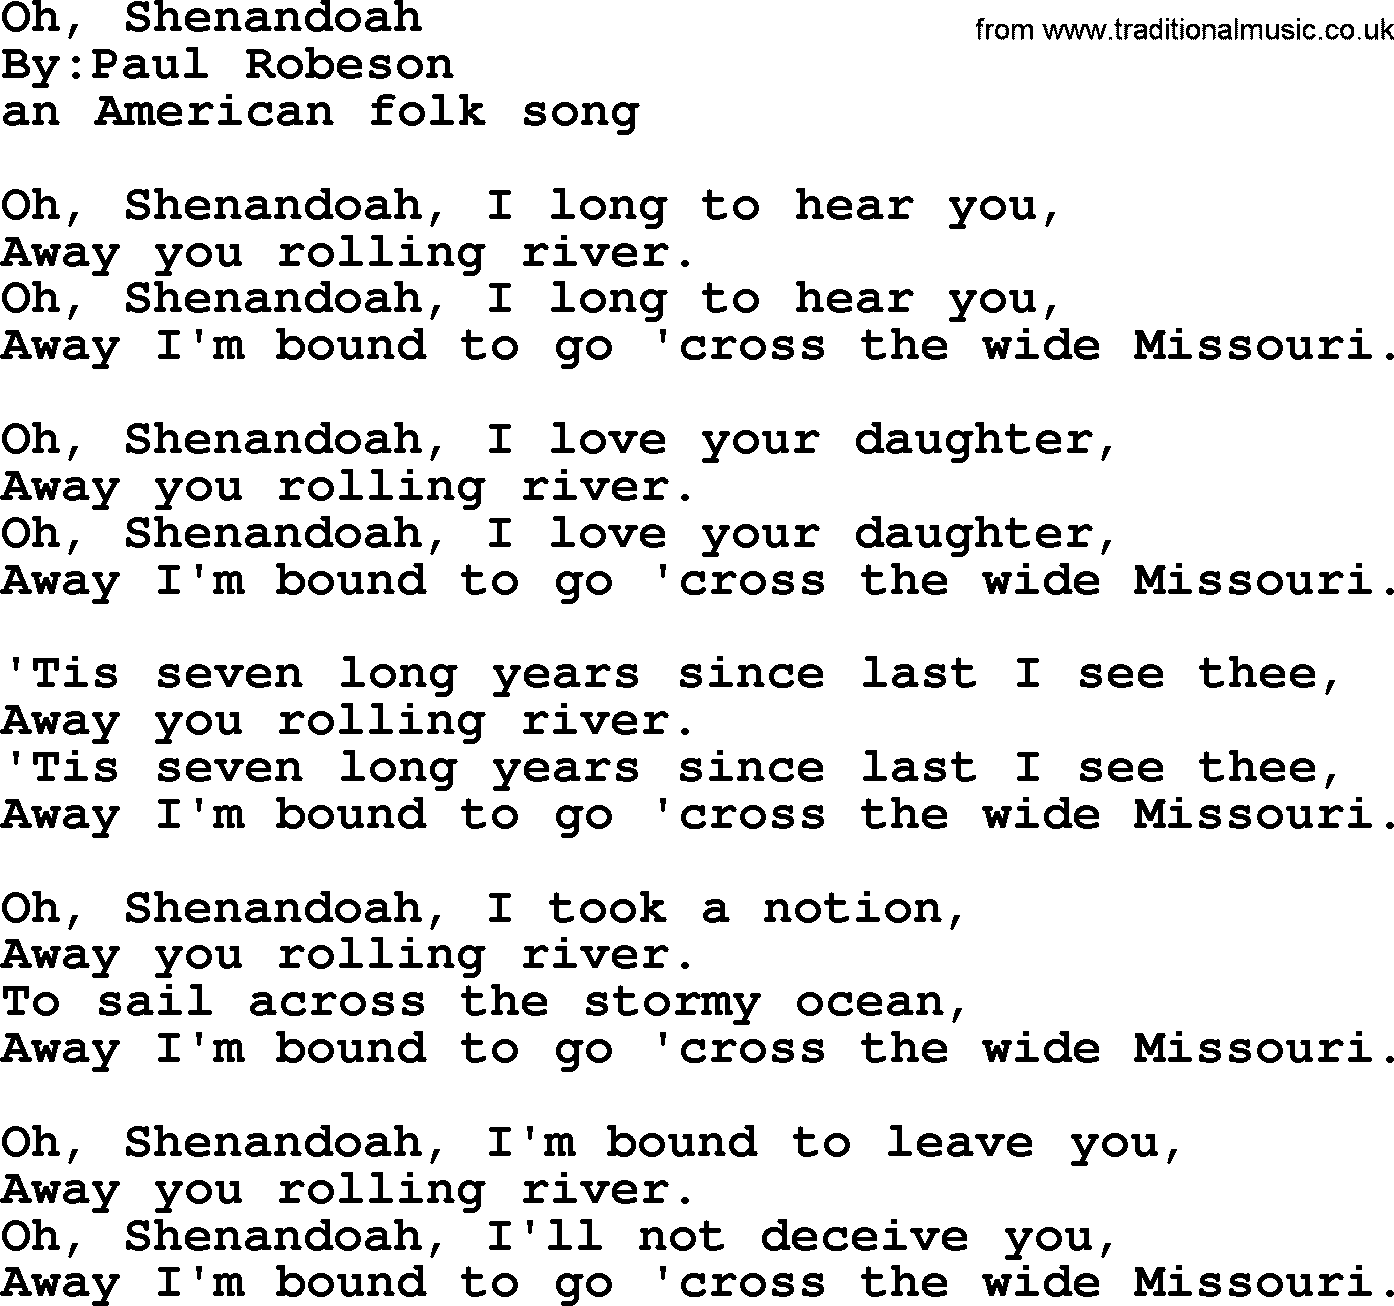 Political, Solidarity, Workers or Union song: Oh Shenandoah, lyrics